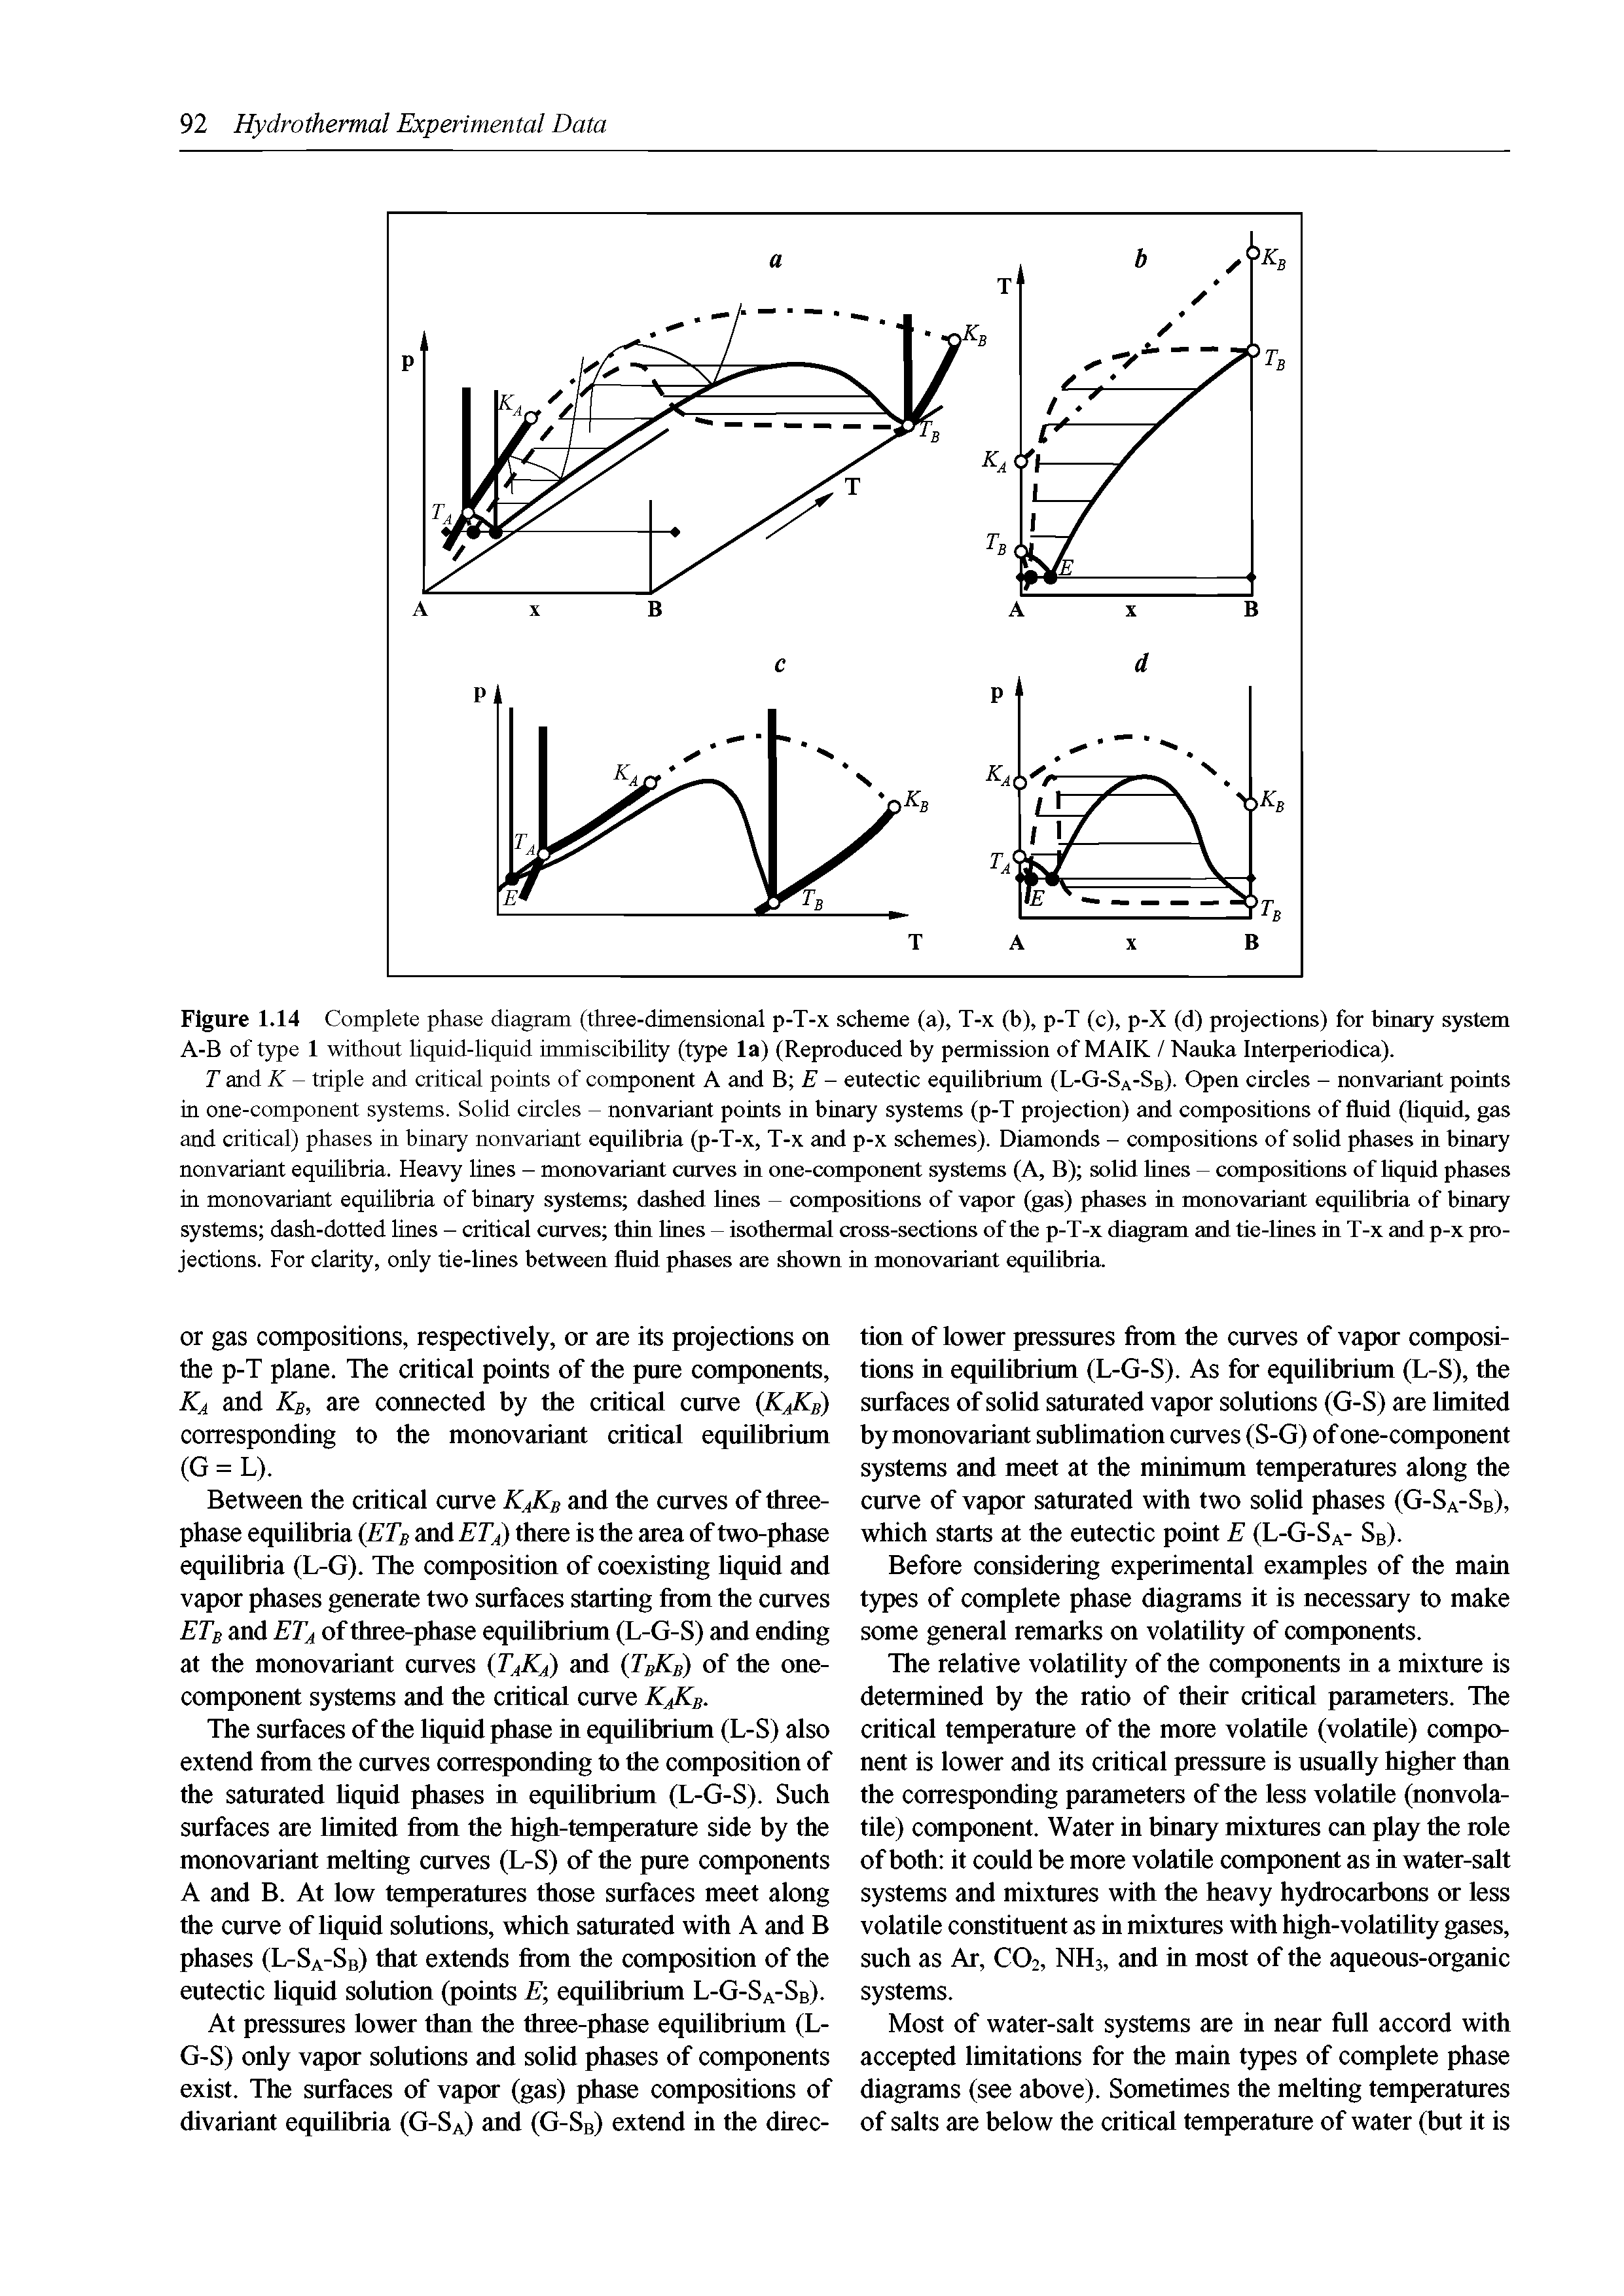 Figure 1.14 Complete phase diagram (three-dimensional p-T-x scheme (a), T-x (b), p-T (c), p-X (d) projections) for binary system A-B of type 1 without liquid-liquid immiscibility (type la) (Reproduced by permission of M AIK / Nauka Interperiodica).